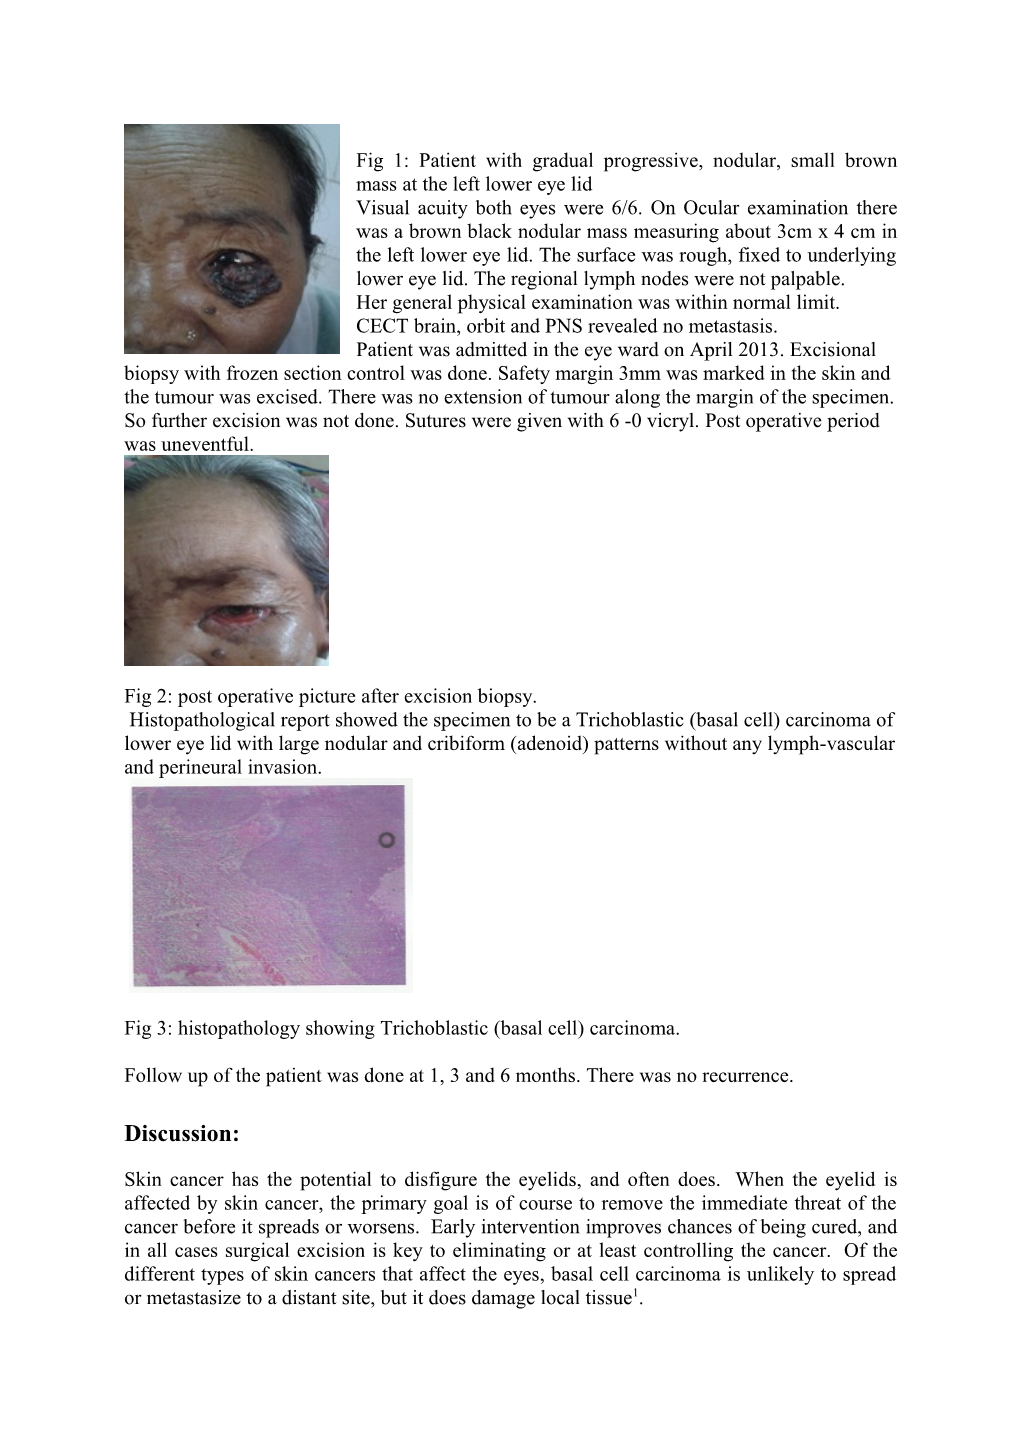 Late Presentation of Basal Cell Carcinoma - a Case Report